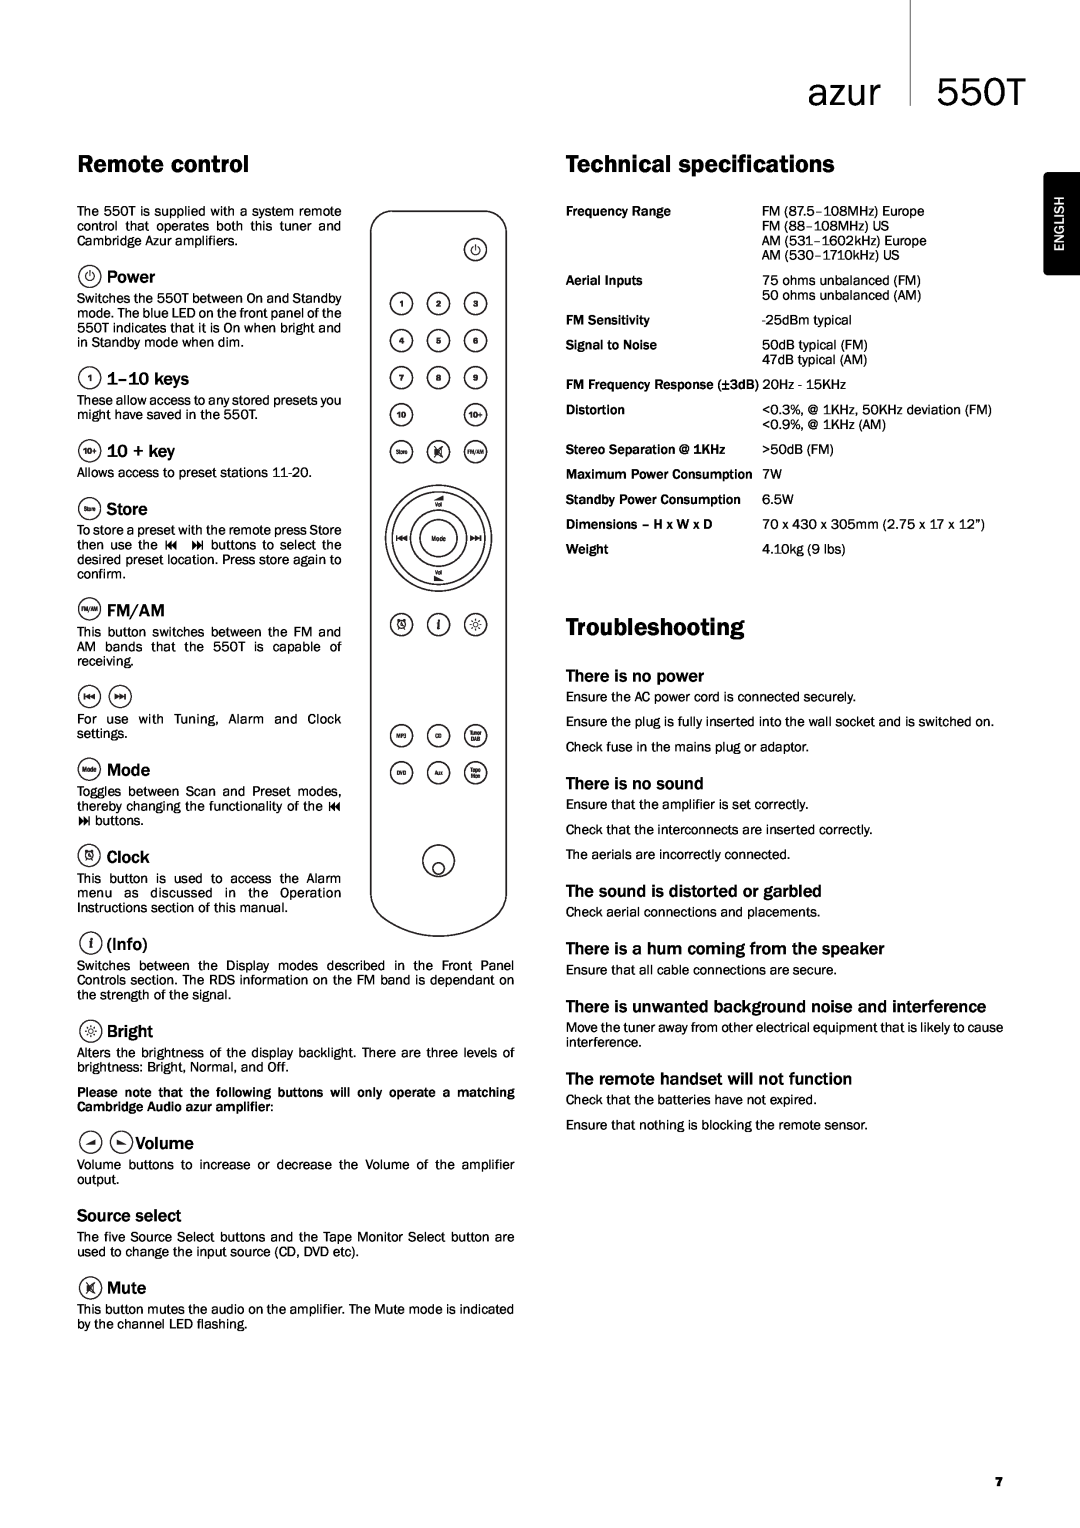 Cambridge Audio 550T user manual azur, Remote control, Technical specifications, Troubleshooting, 10 + key, Store 